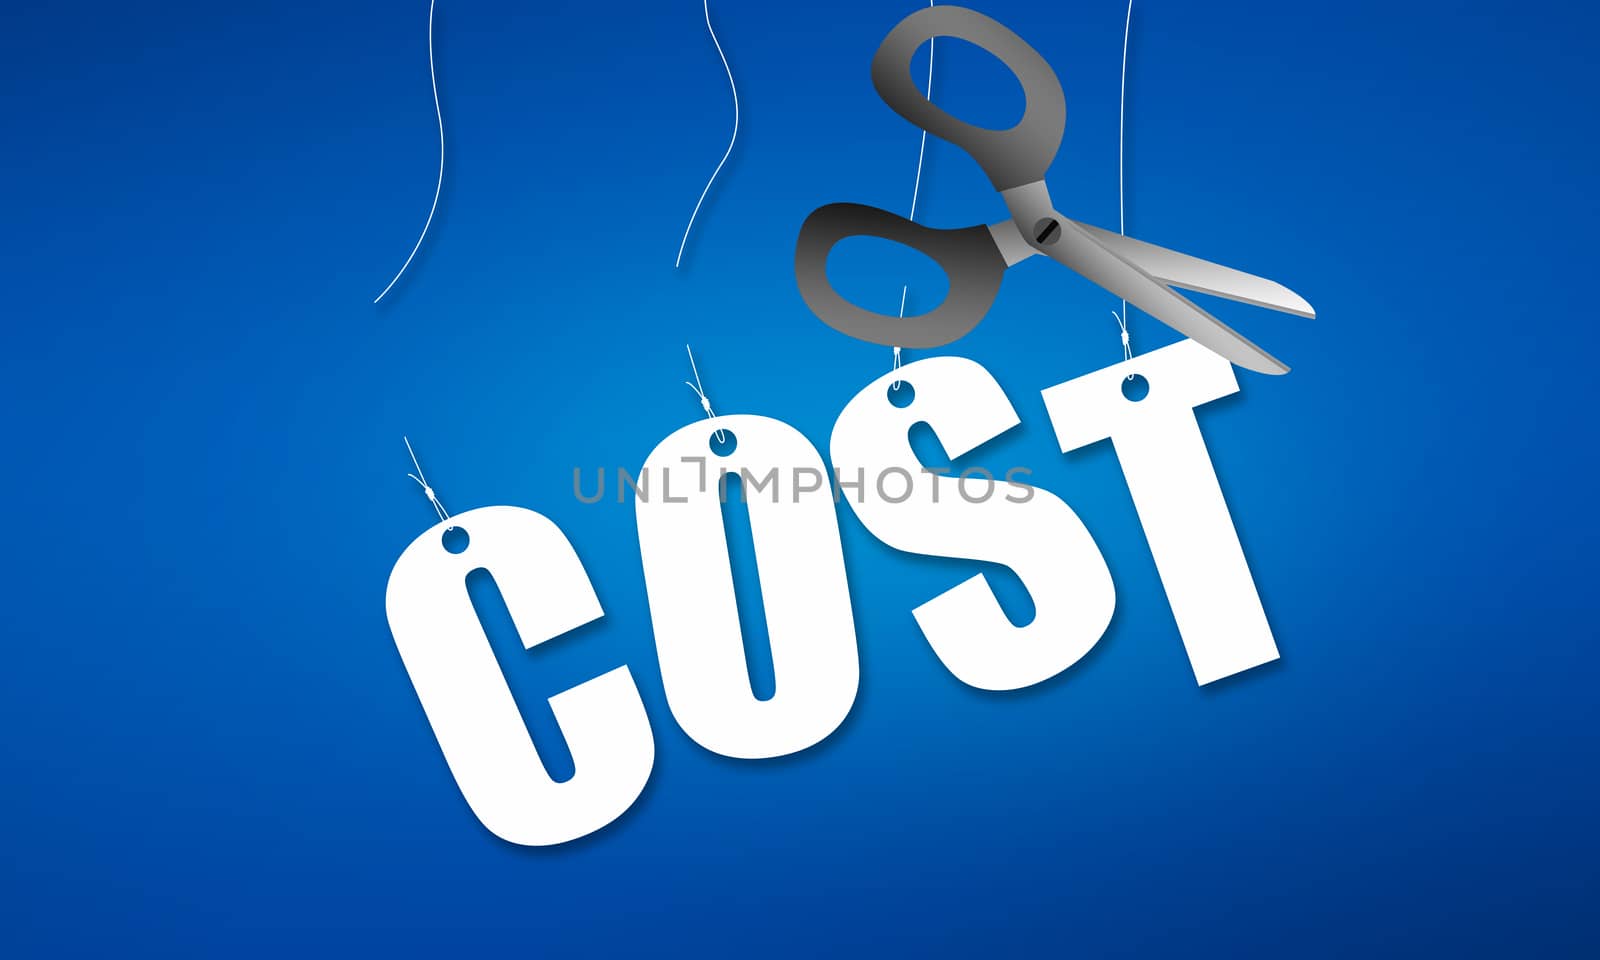 Use scissors to cut away cost word by tang90246